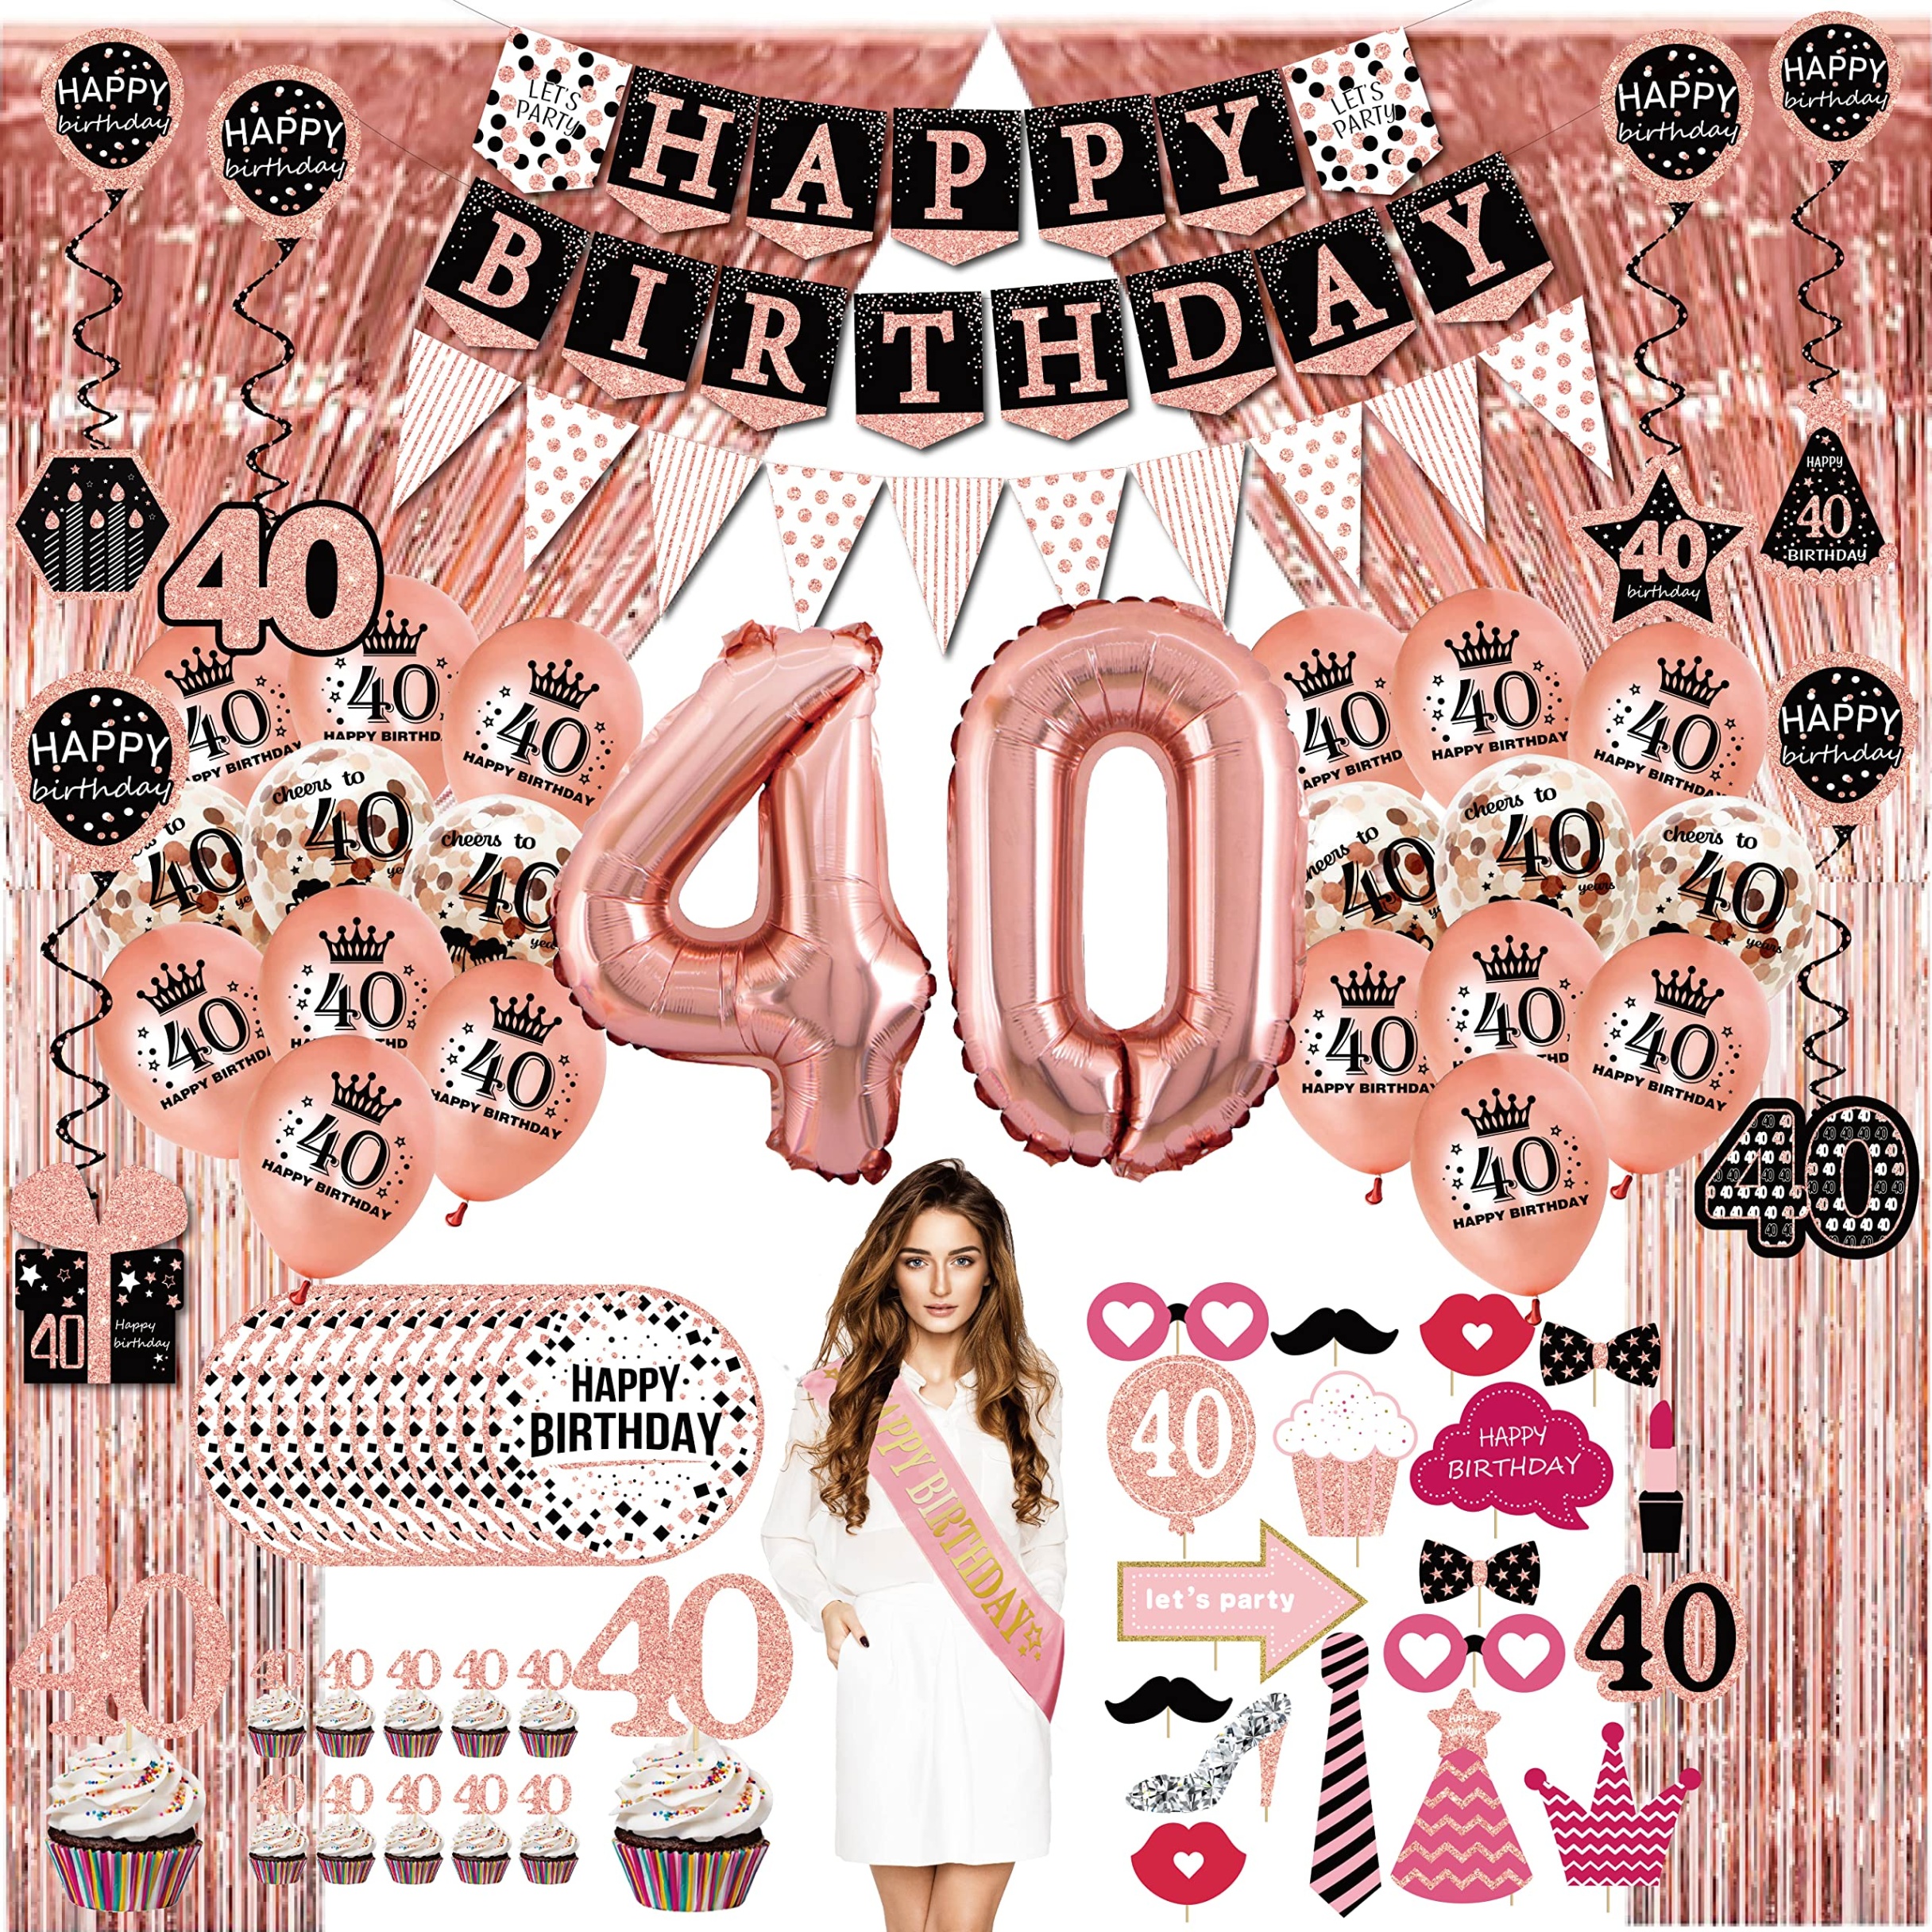 40th birthday decorations woman Bulan 1 th birthday decorations for women - (pack) rose gold party Banner,  Pennant, Hanging Swirl, birthday Balloons, Foil Backdrops, cupcake Topper,